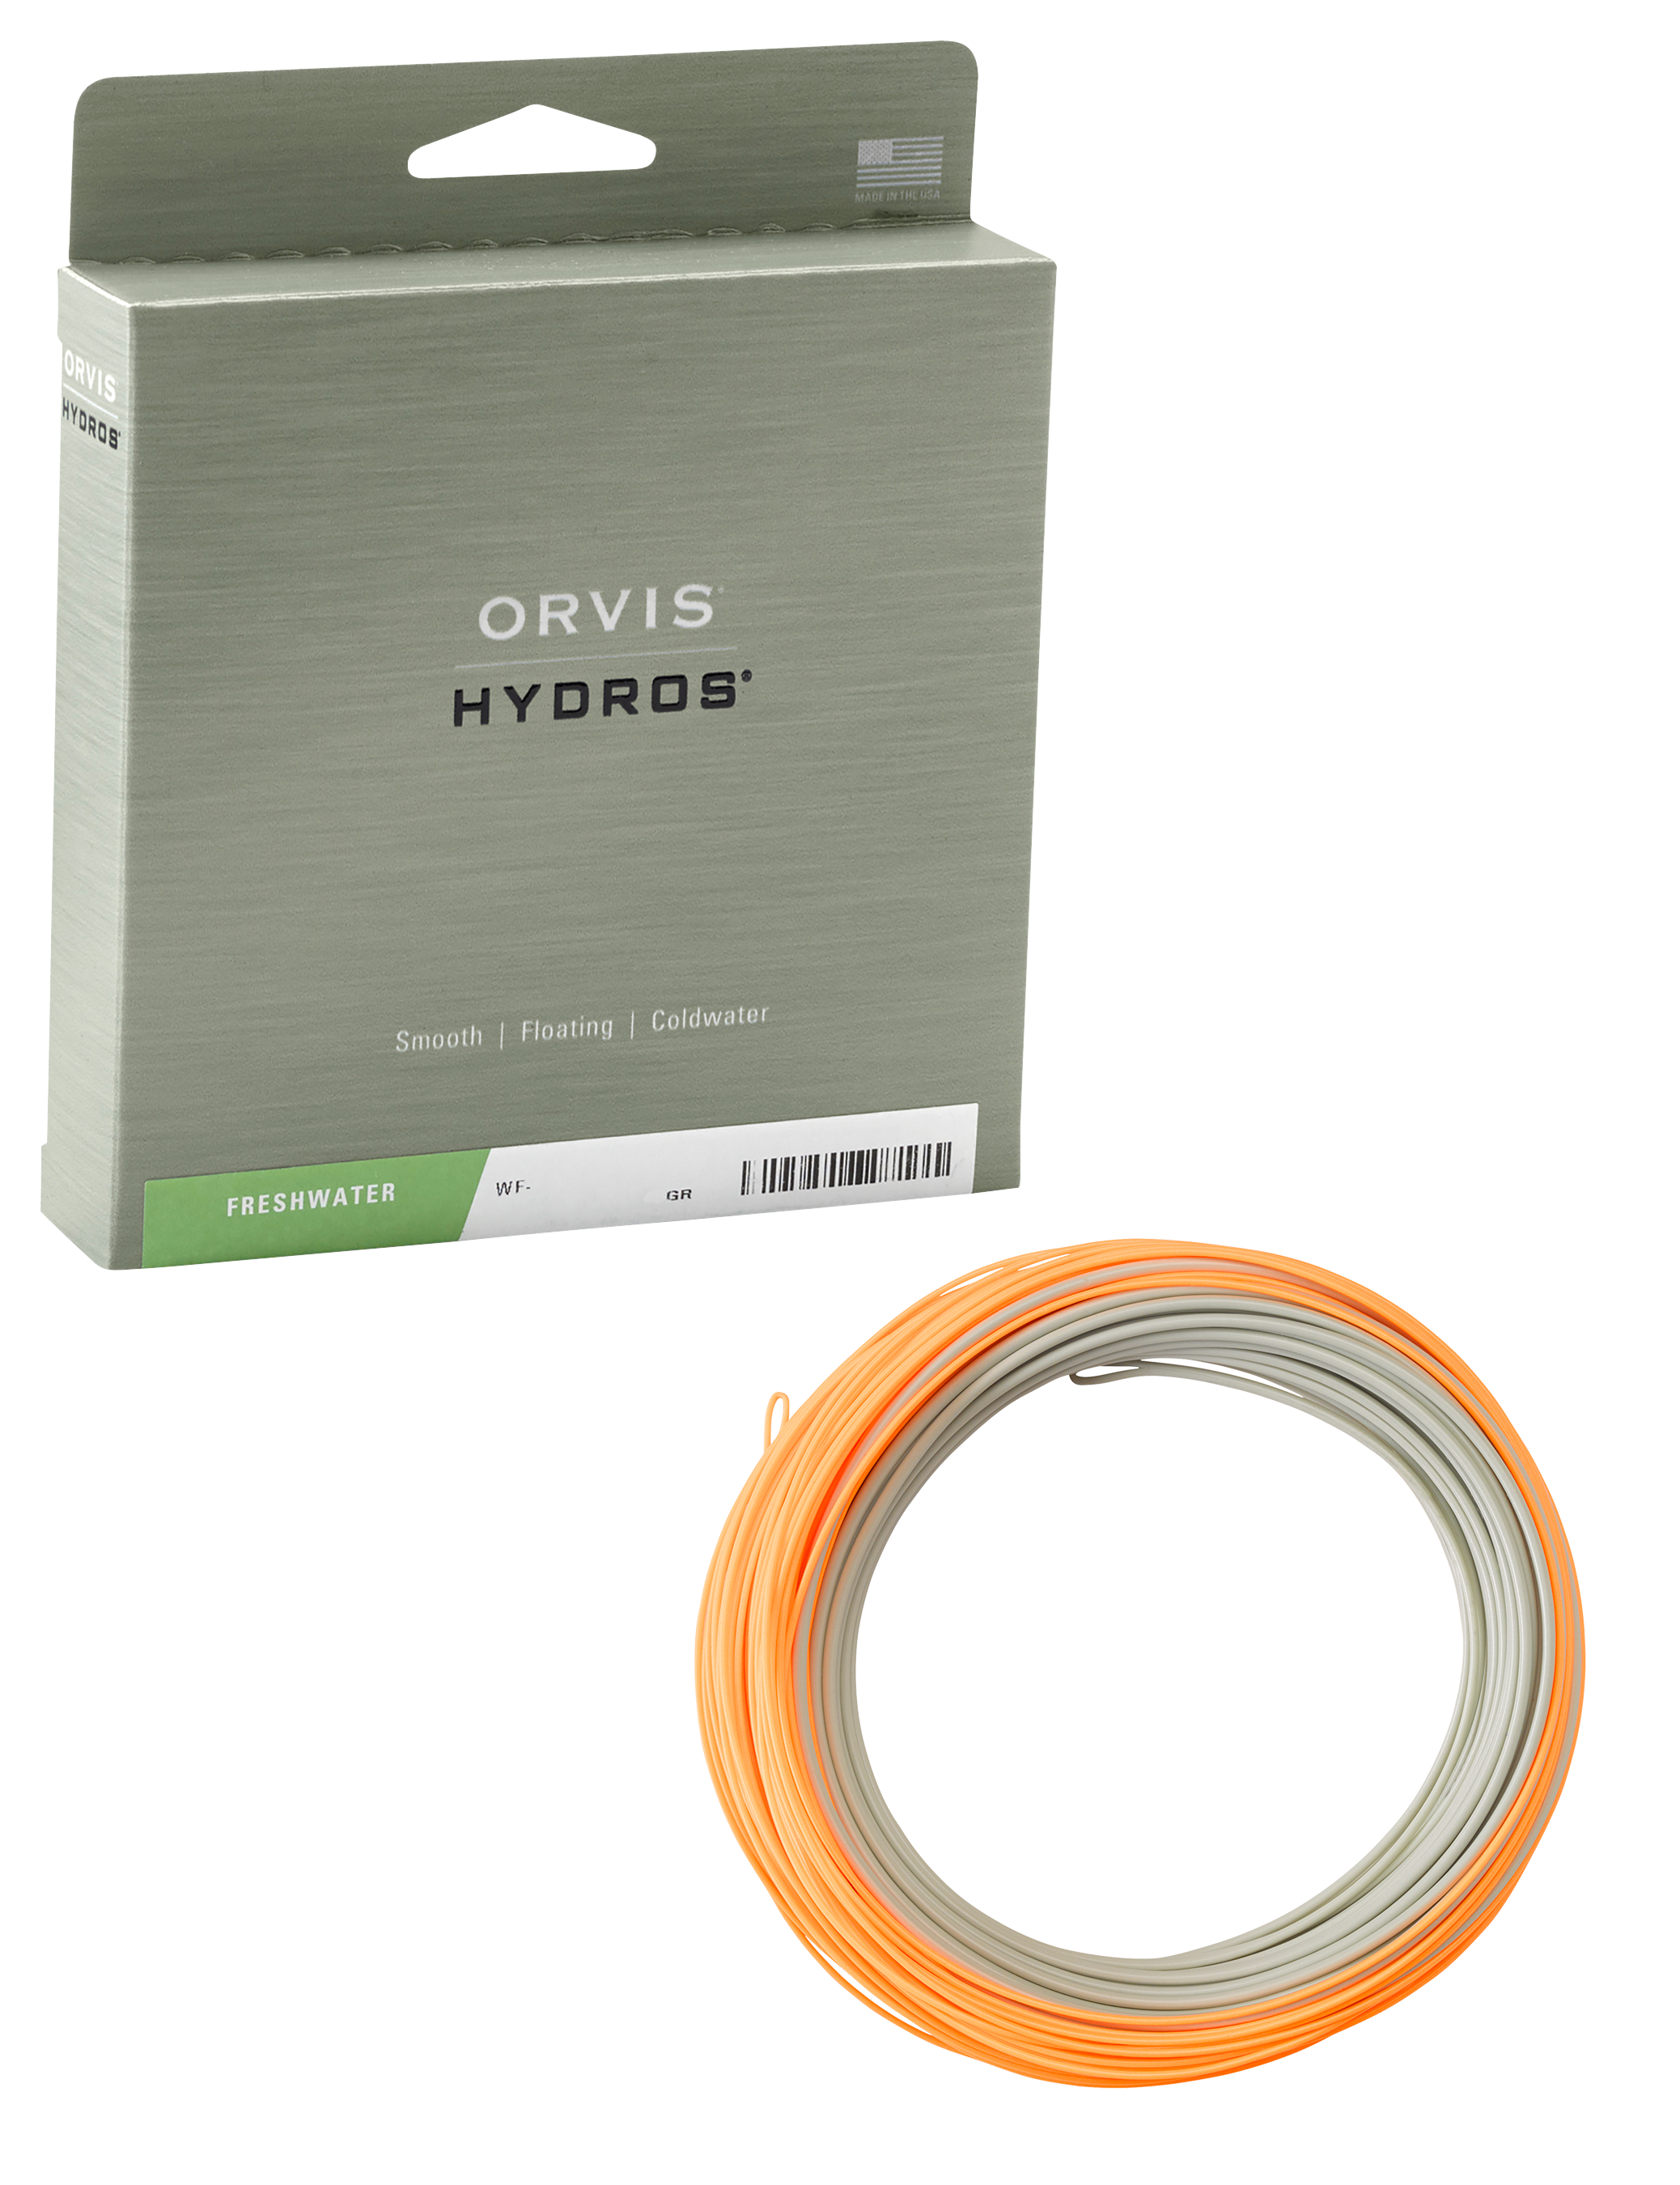 Orvis Hydros Bank Shot Floating Fly Line